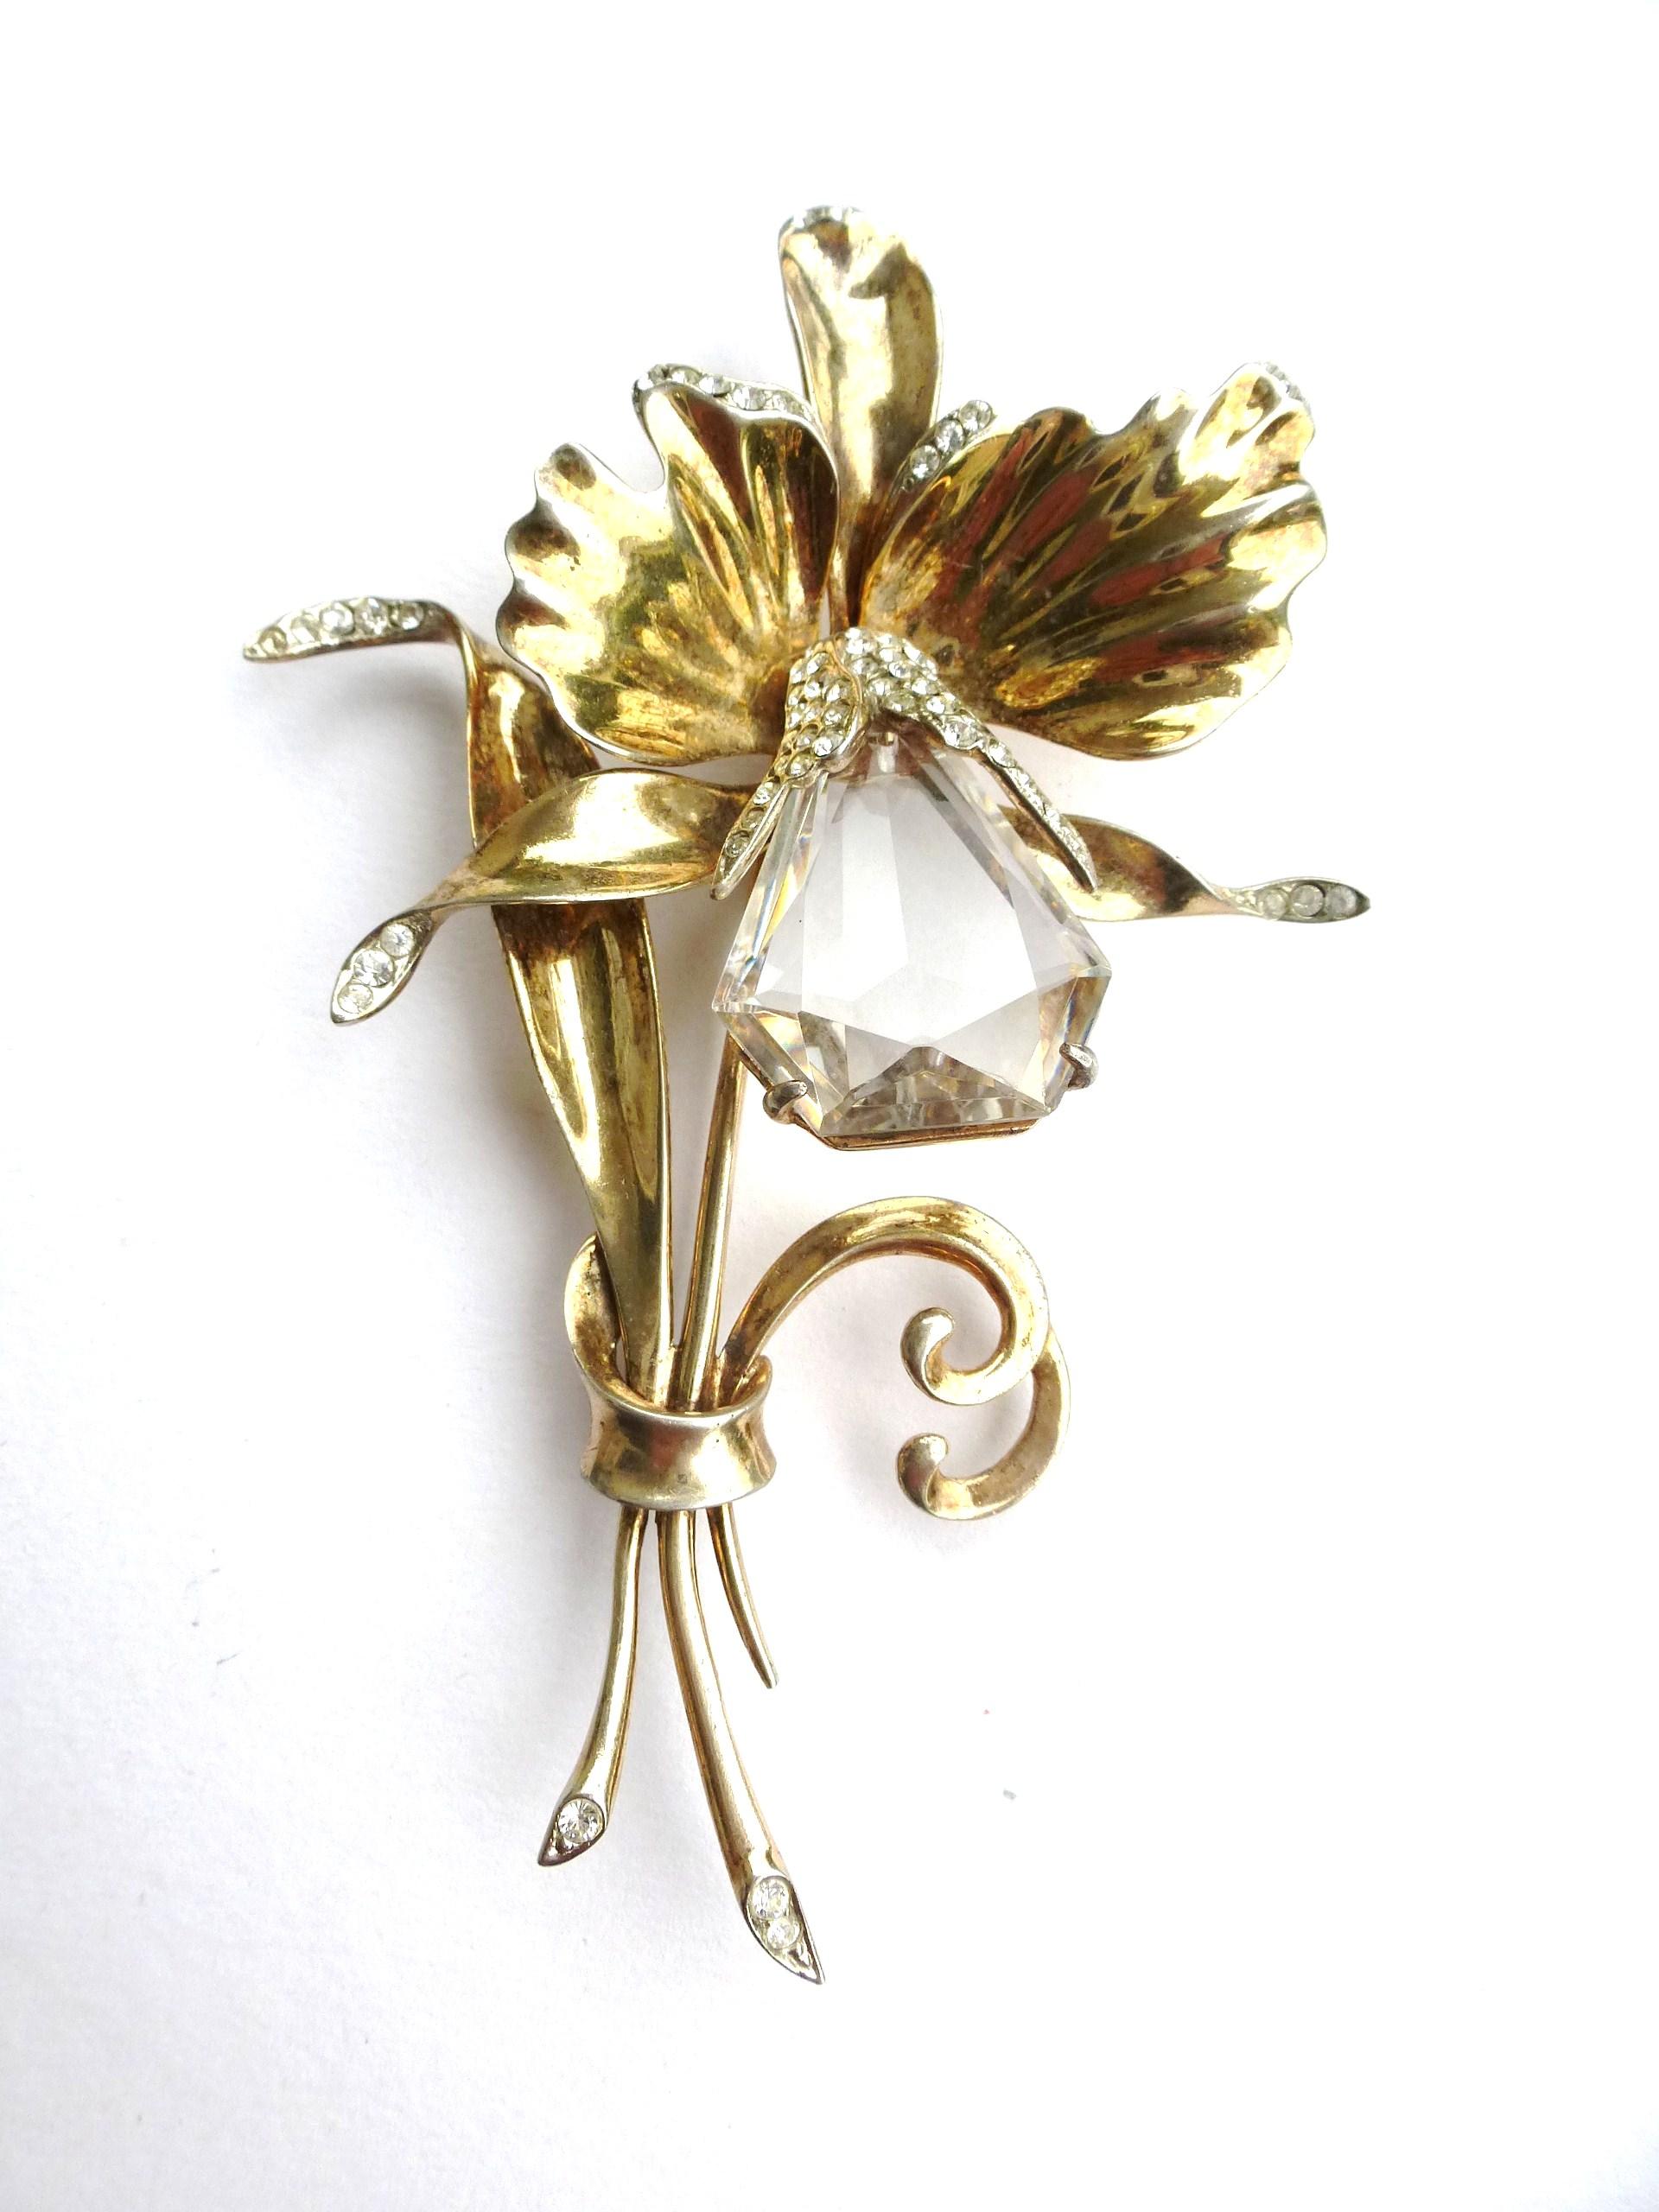 BLOOMING
THE BROOCH CELEBRATES ITS COMEBACK AND LETS OUTFITS SHINE!

Flower brooch in the shape of an orchid, Sterling Silver gold plated from 1930/1940s  
Founded in 1914 in New York by Marcus Stern and Jacques Kreisler.  

Measurement: High 10 cm